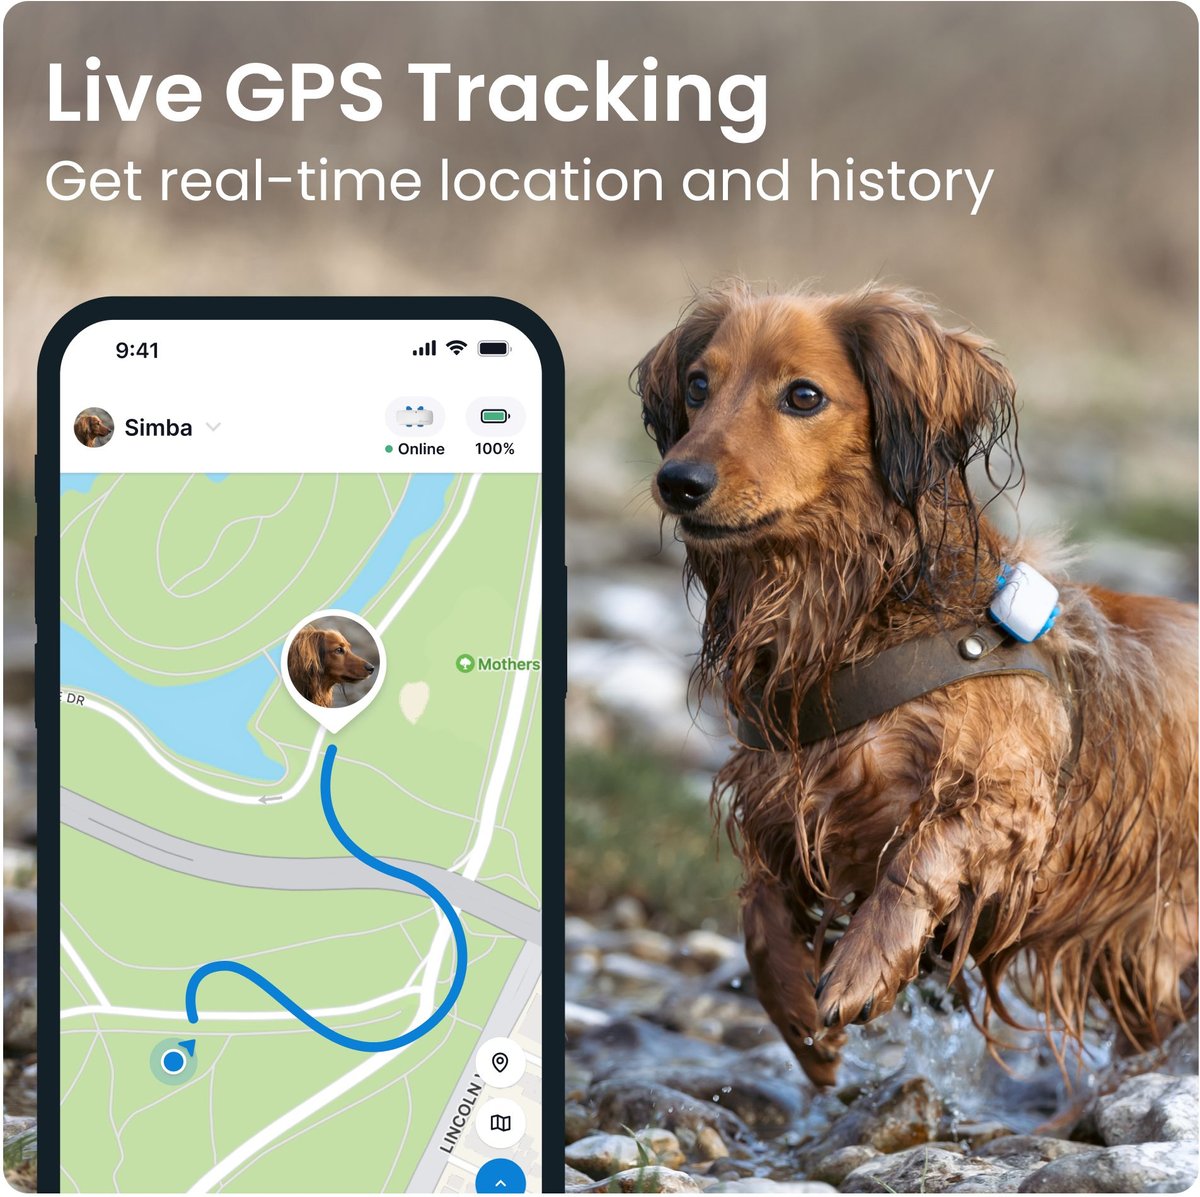 TRACTIVE Dog GPS Tracker with Activity Monitoring, Fits any Collar